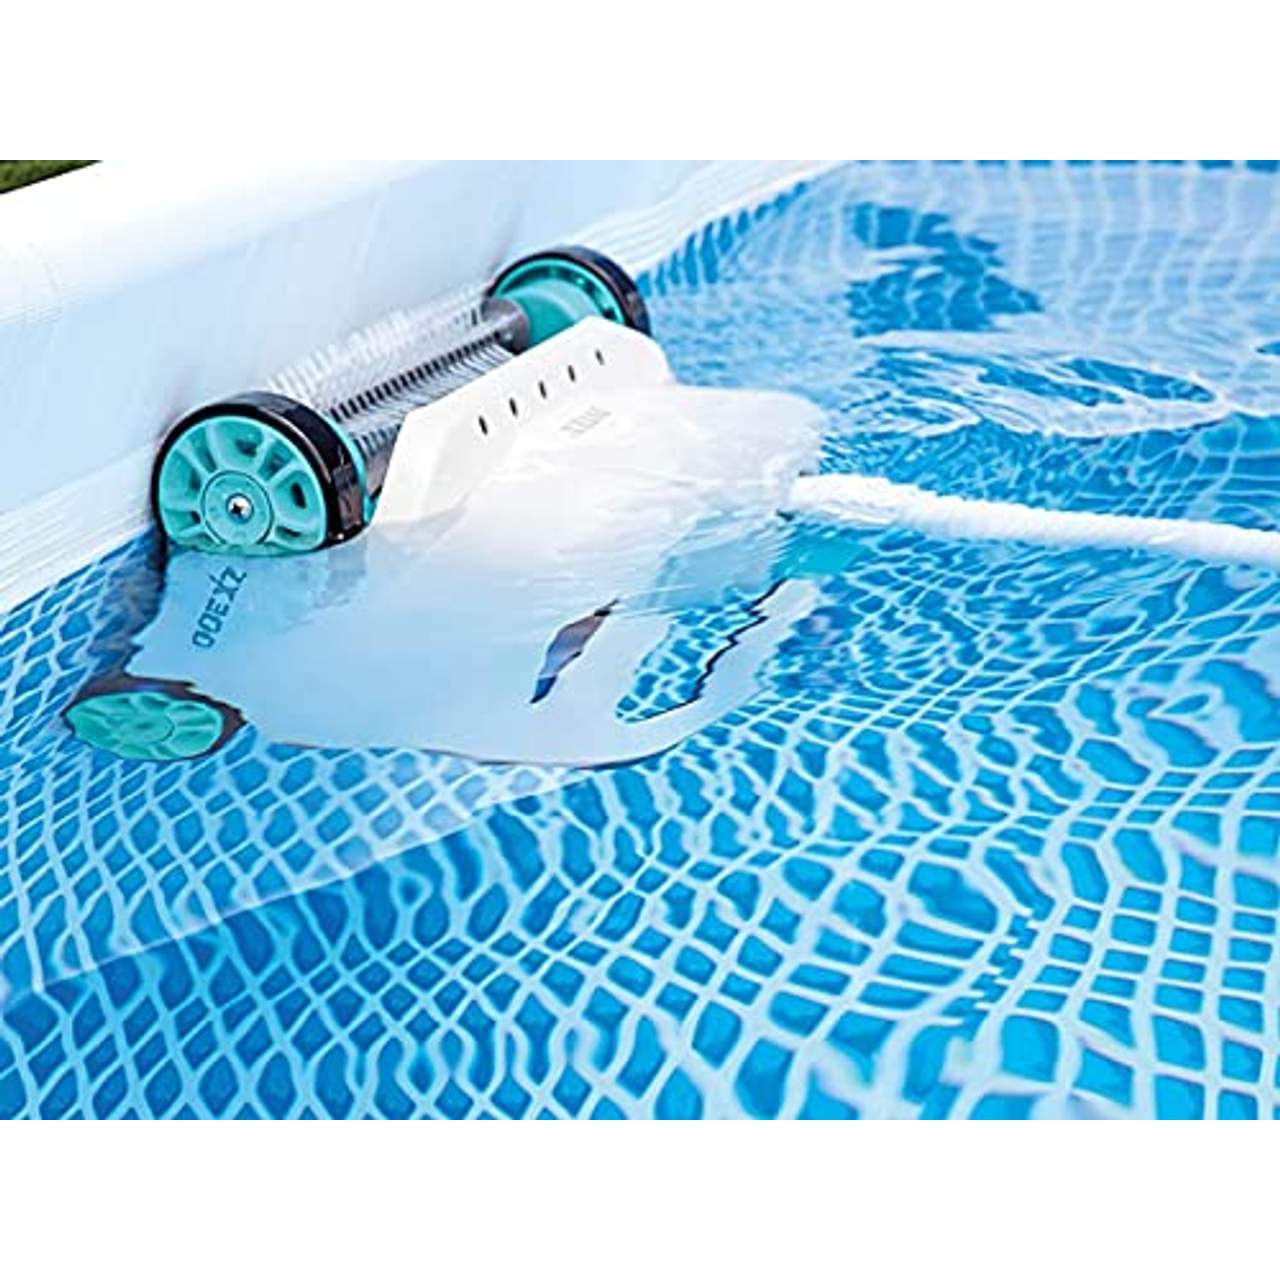 Intex Deluxe Auto Pool Cleaner ZX300